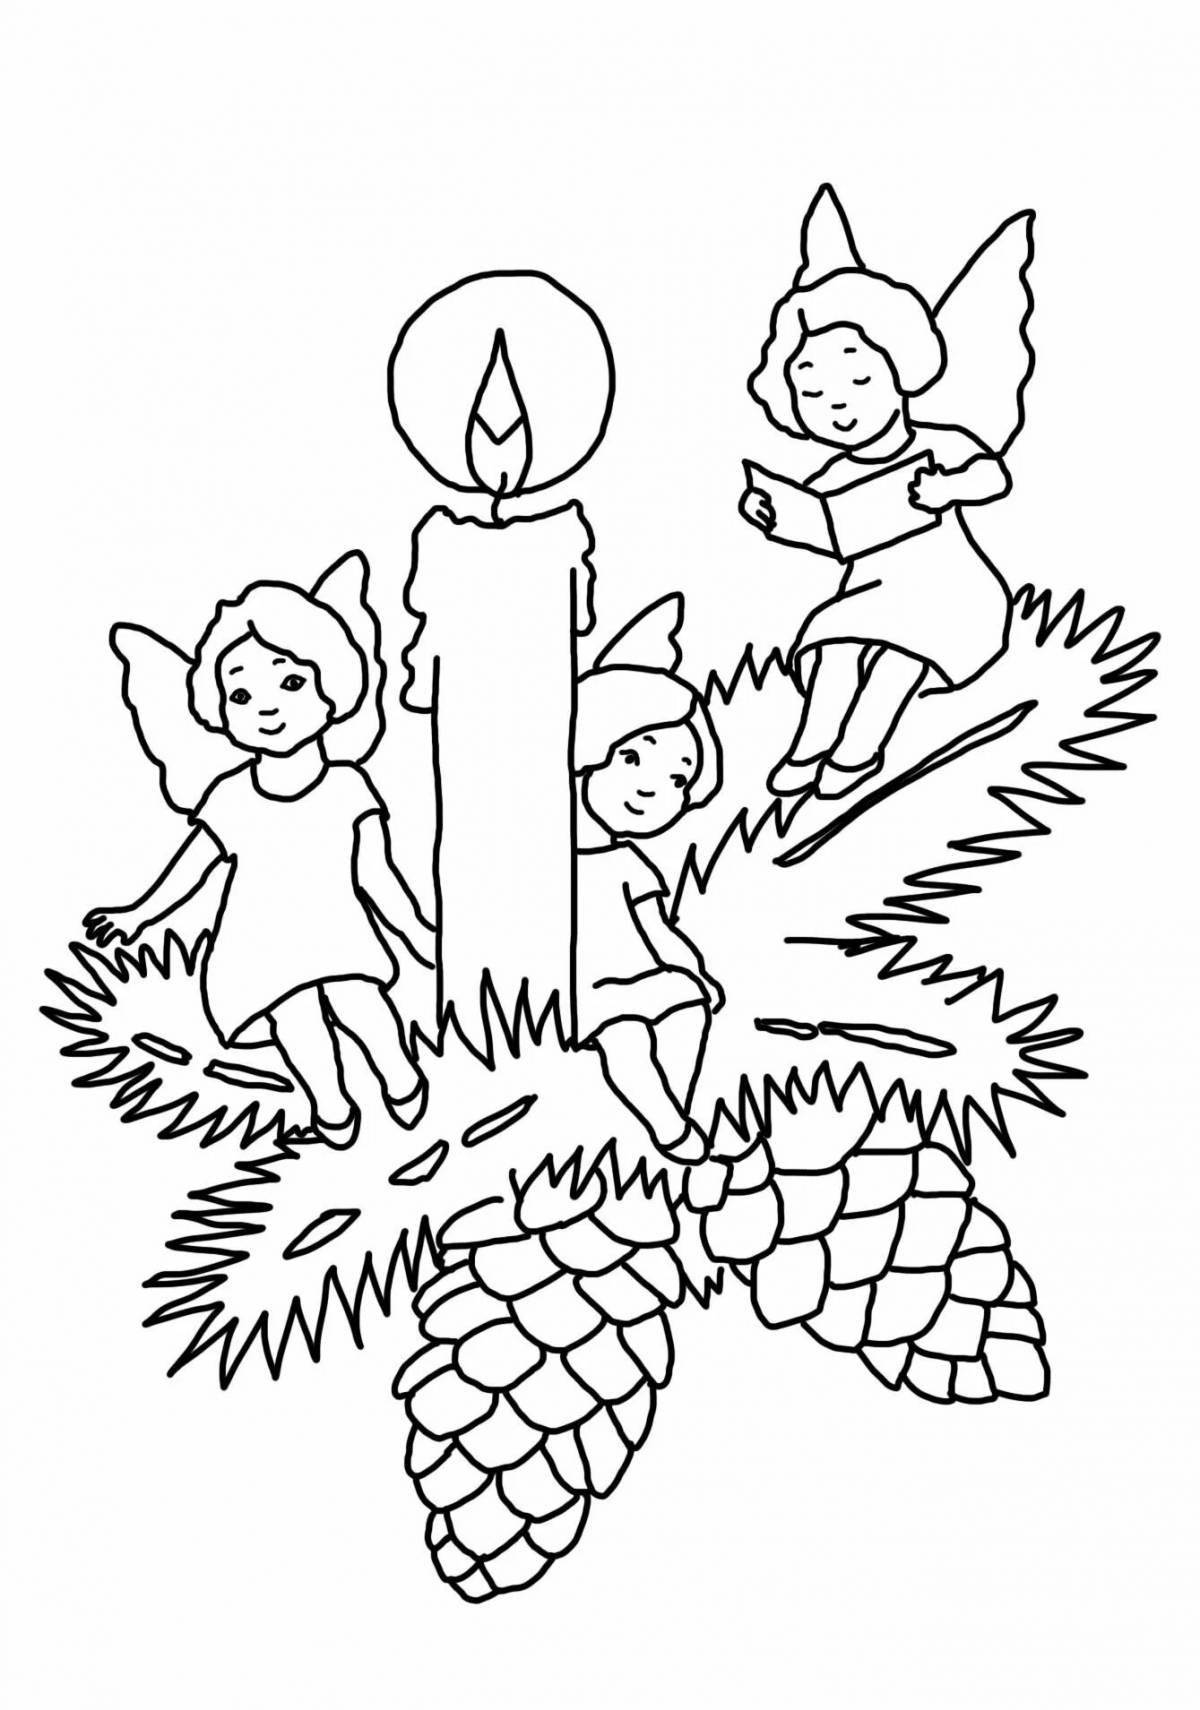 Bright Christmas coloring book for children 3-4 years old